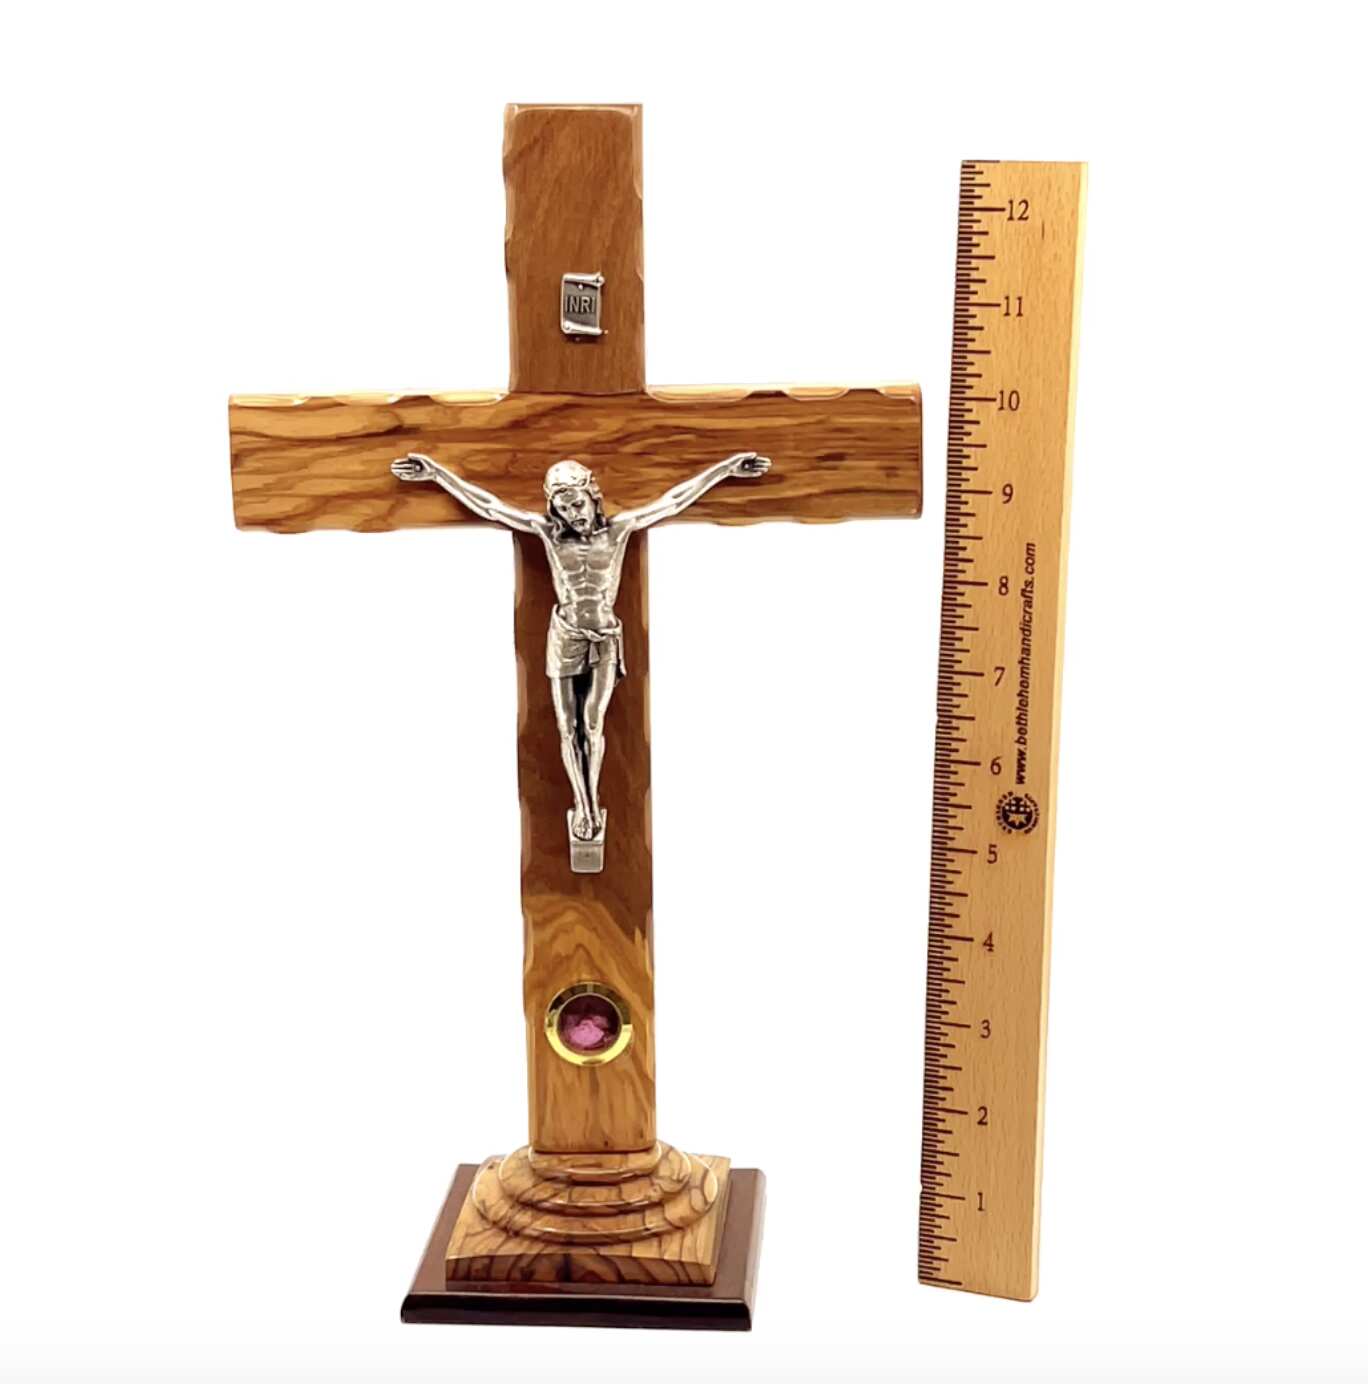 13" Standing Crucifix with Incense, 14 Stations of Cross Engraved on Back